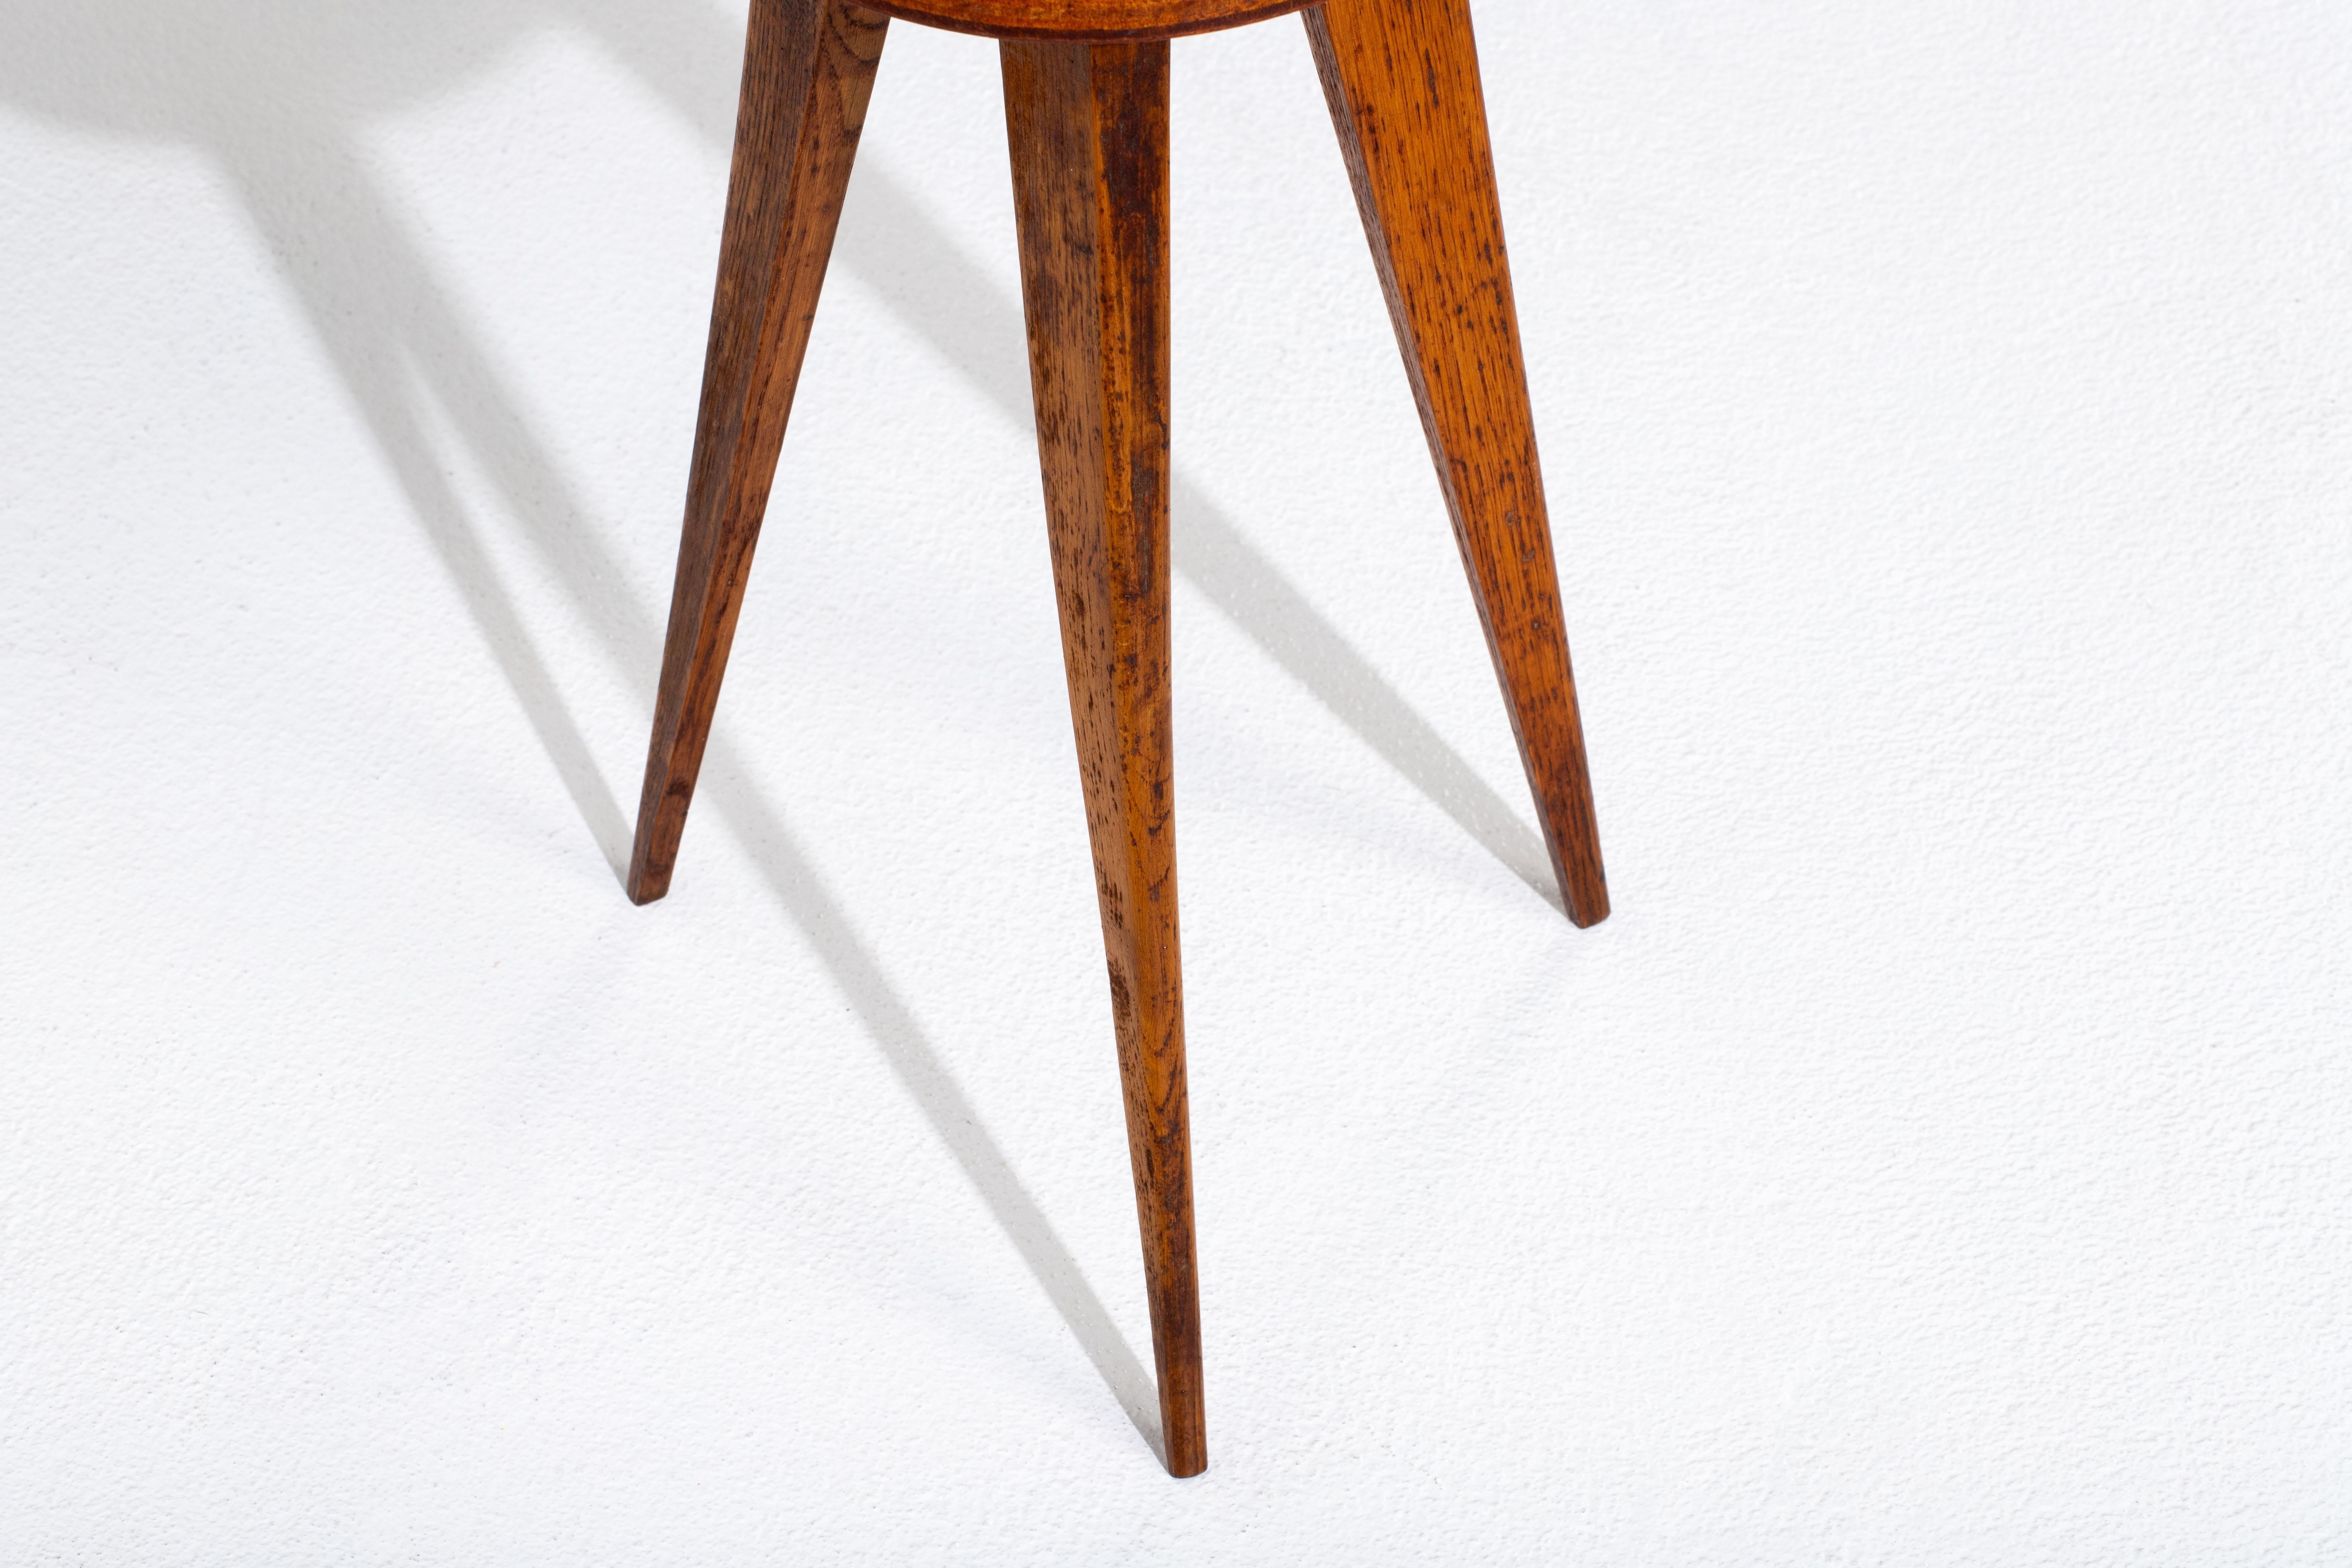 Midcentury Oak Stool with Heart shaped seat, 1960s, France In Good Condition For Sale In Wiesbaden, DE